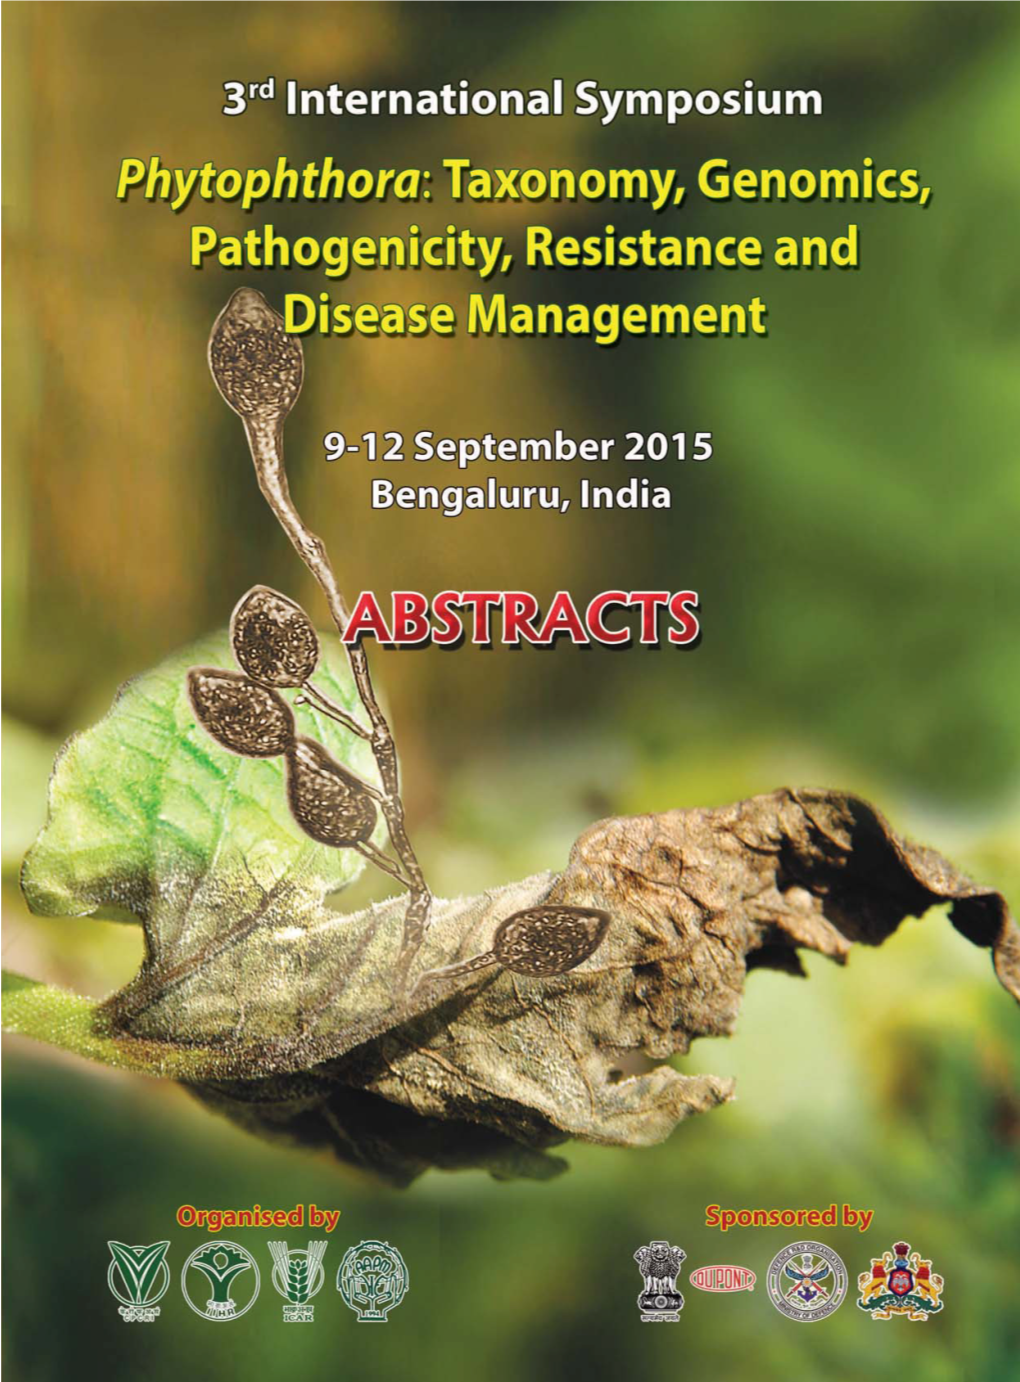 Phytophthora : Taxonomy, Genomics, Pathogenicity, Resistance and Disease Management